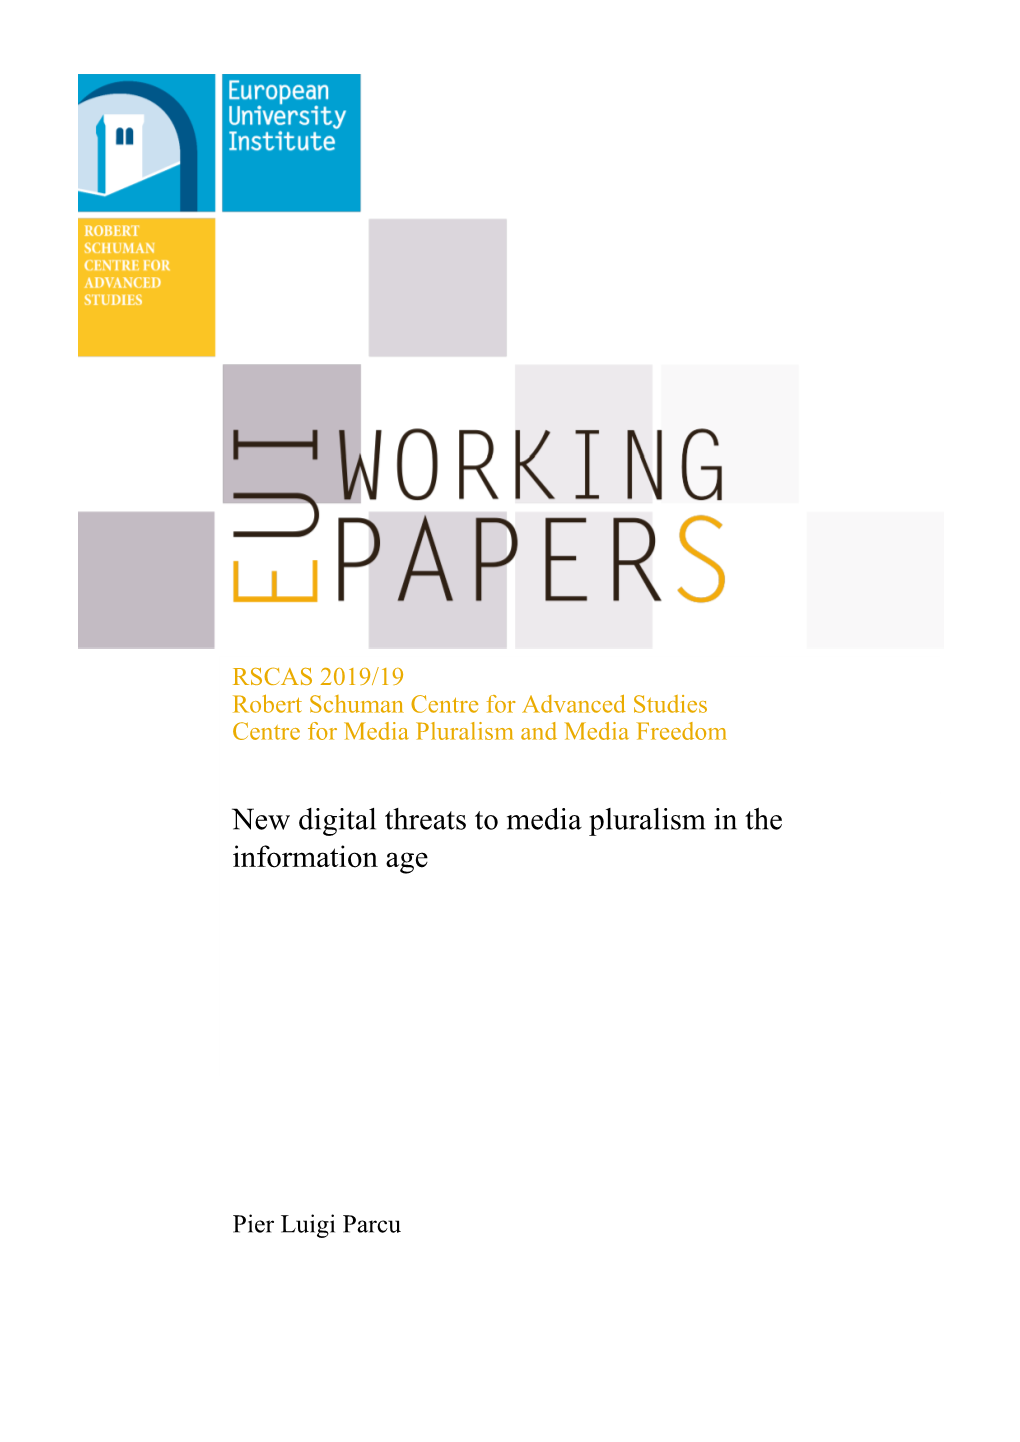 RSCAS 2019/19 New Digital Threats to Media Pluralism in the Information